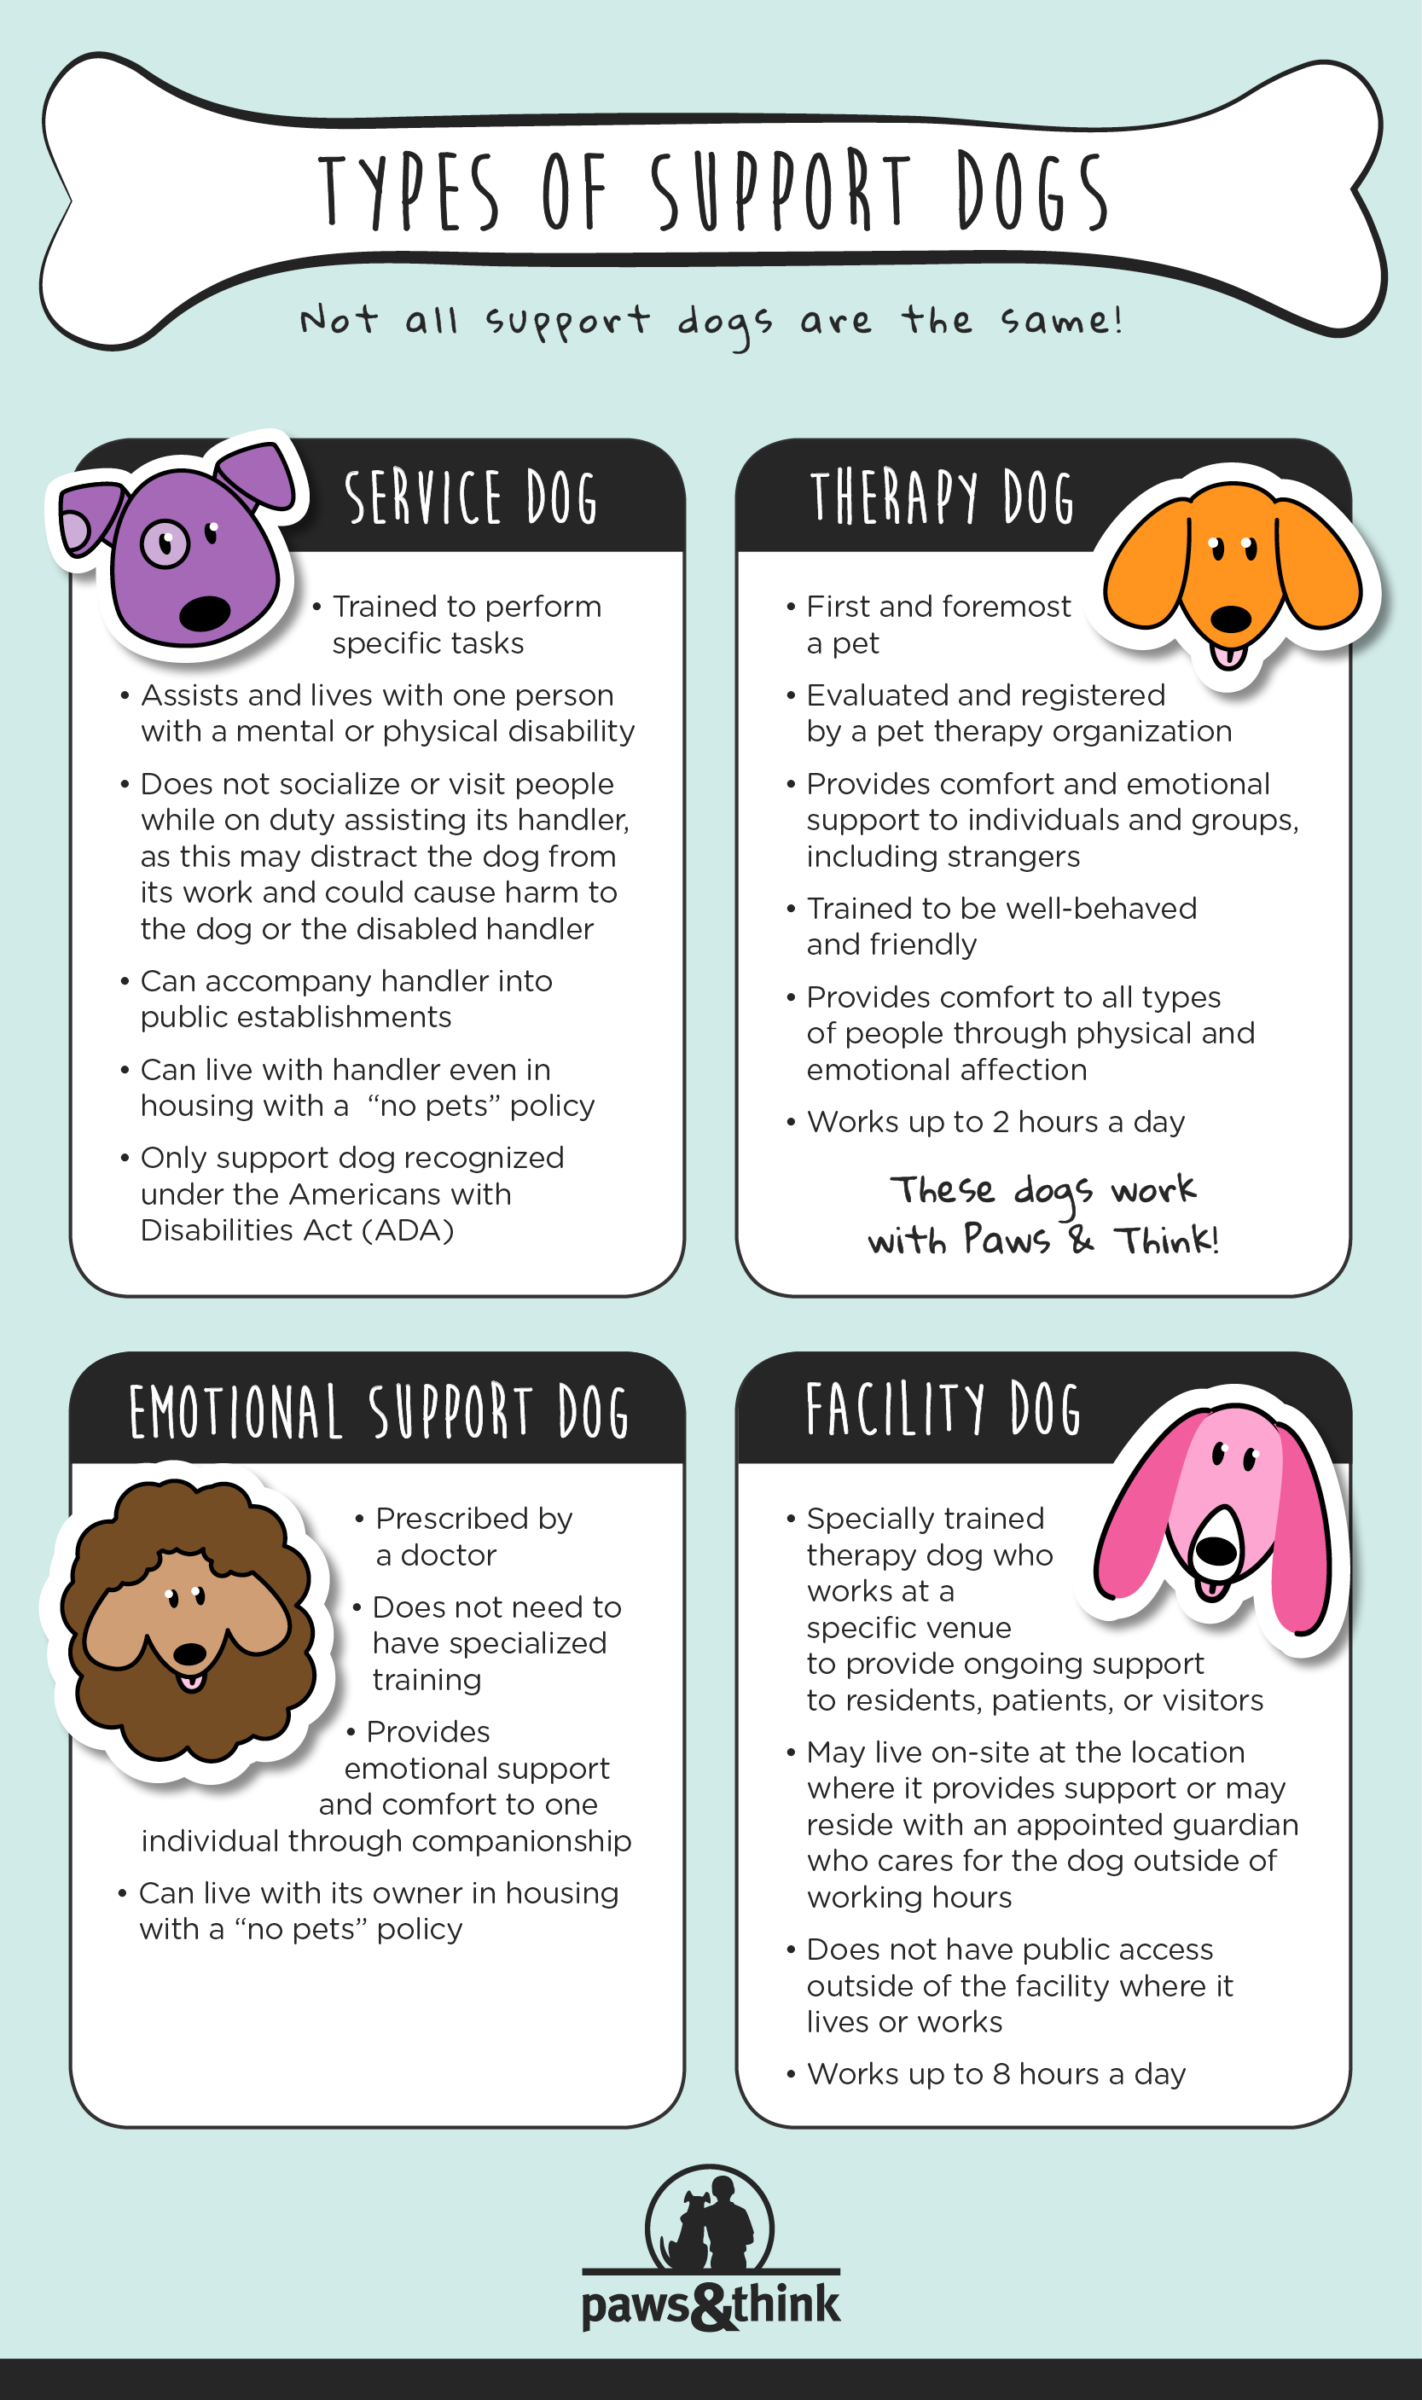 Types of Support Dogs